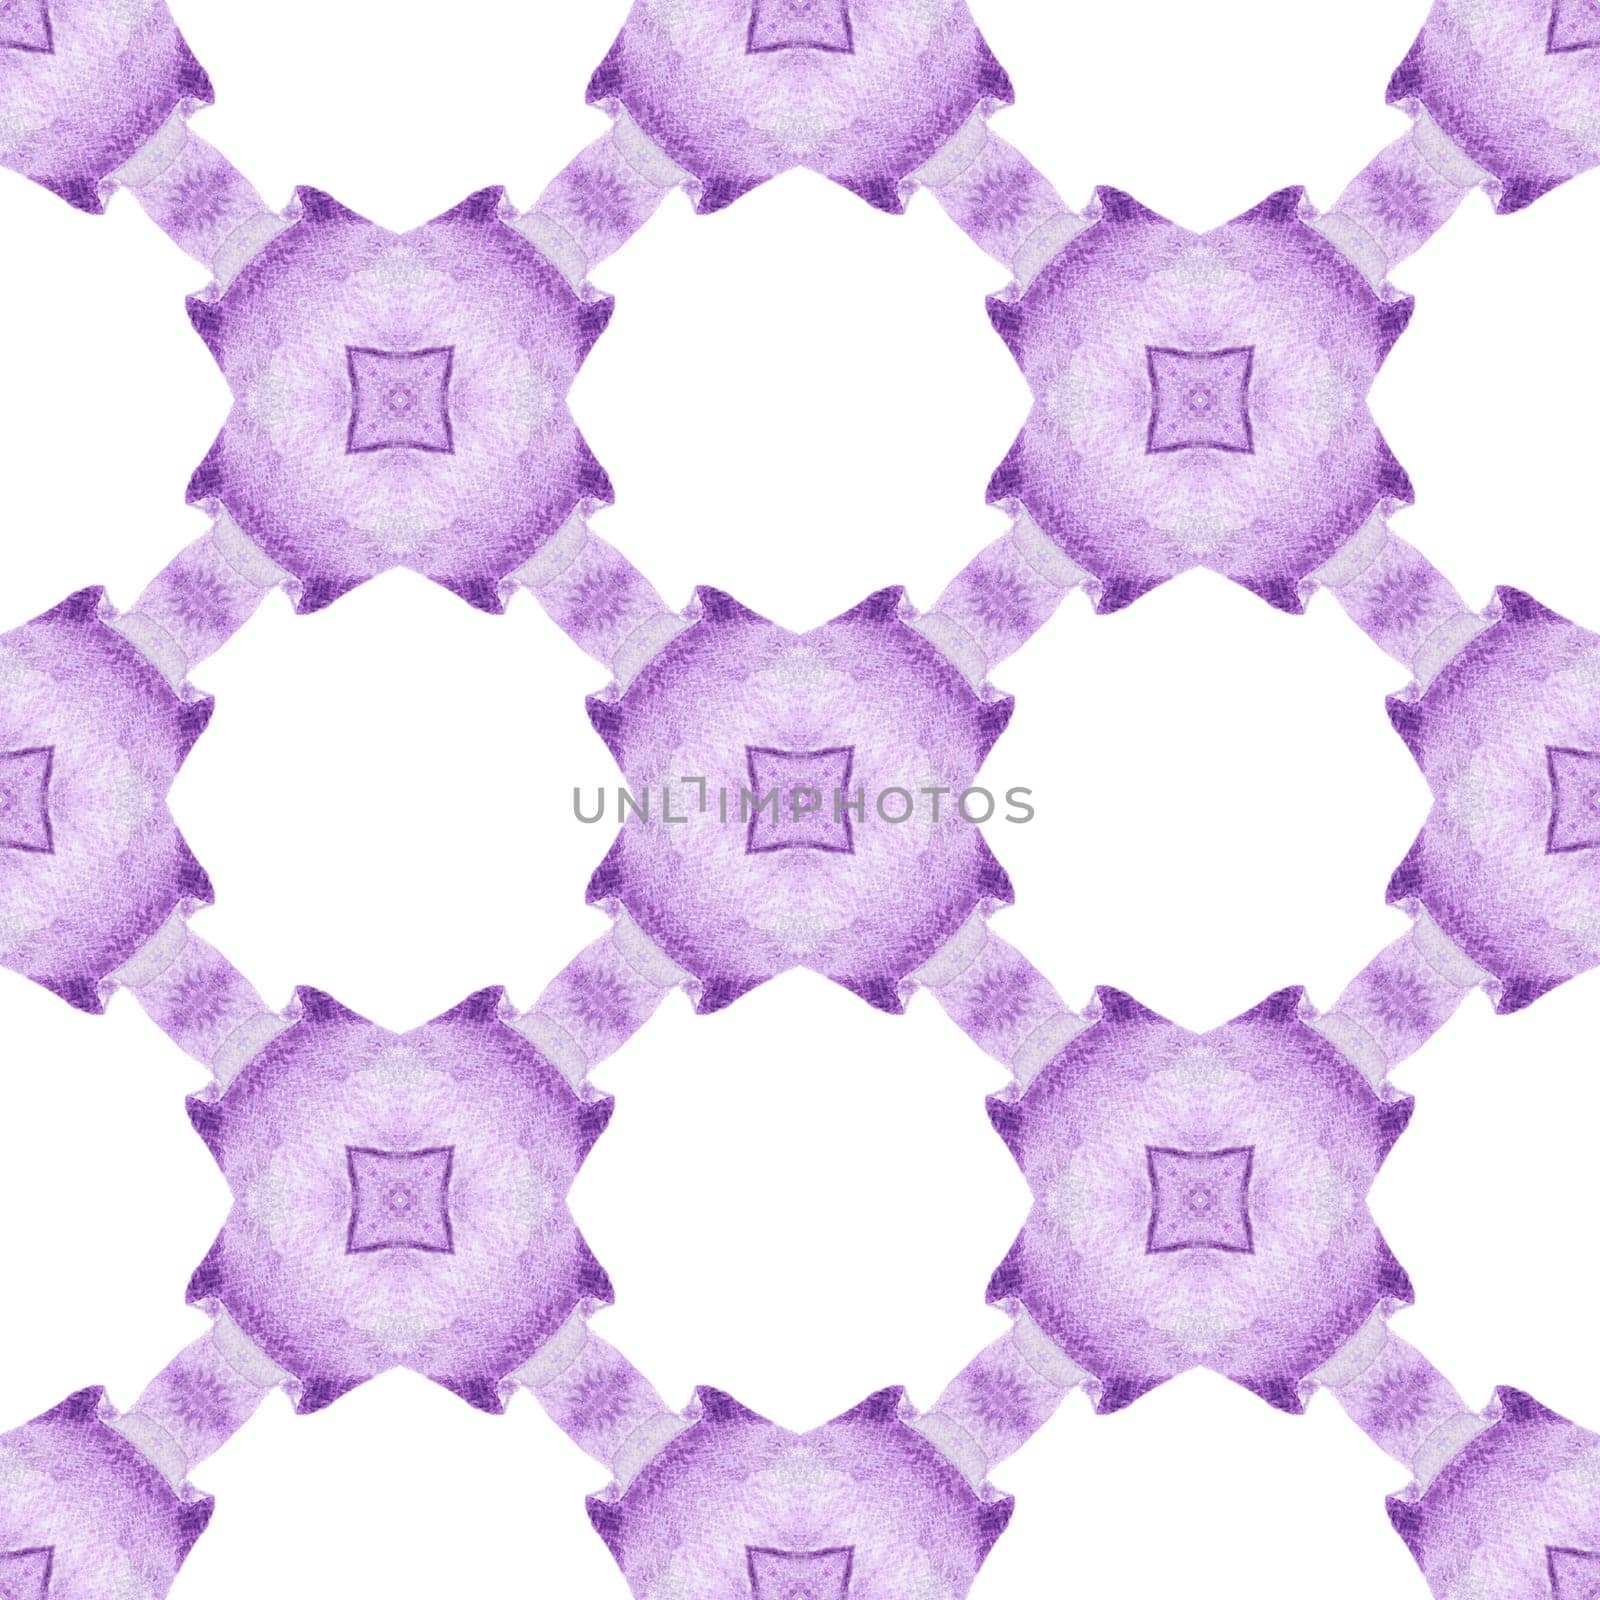 Ethnic hand painted pattern. Purple lovely boho chic summer design. Watercolor summer ethnic border pattern. Textile ready astonishing print, swimwear fabric, wallpaper, wrapping.